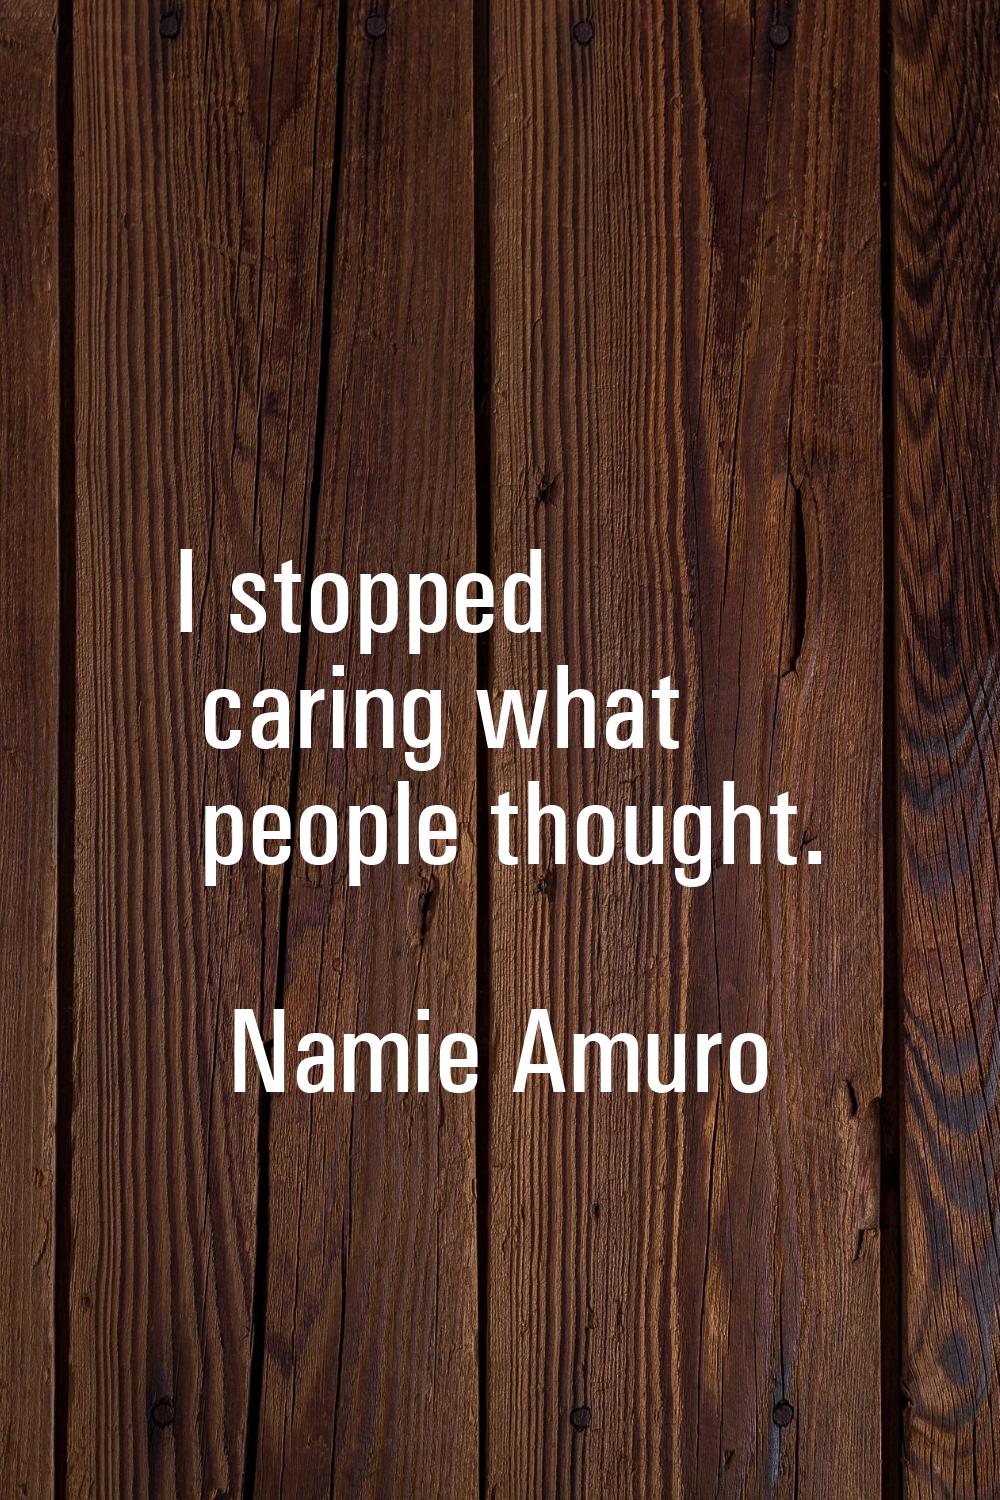 I stopped caring what people thought.